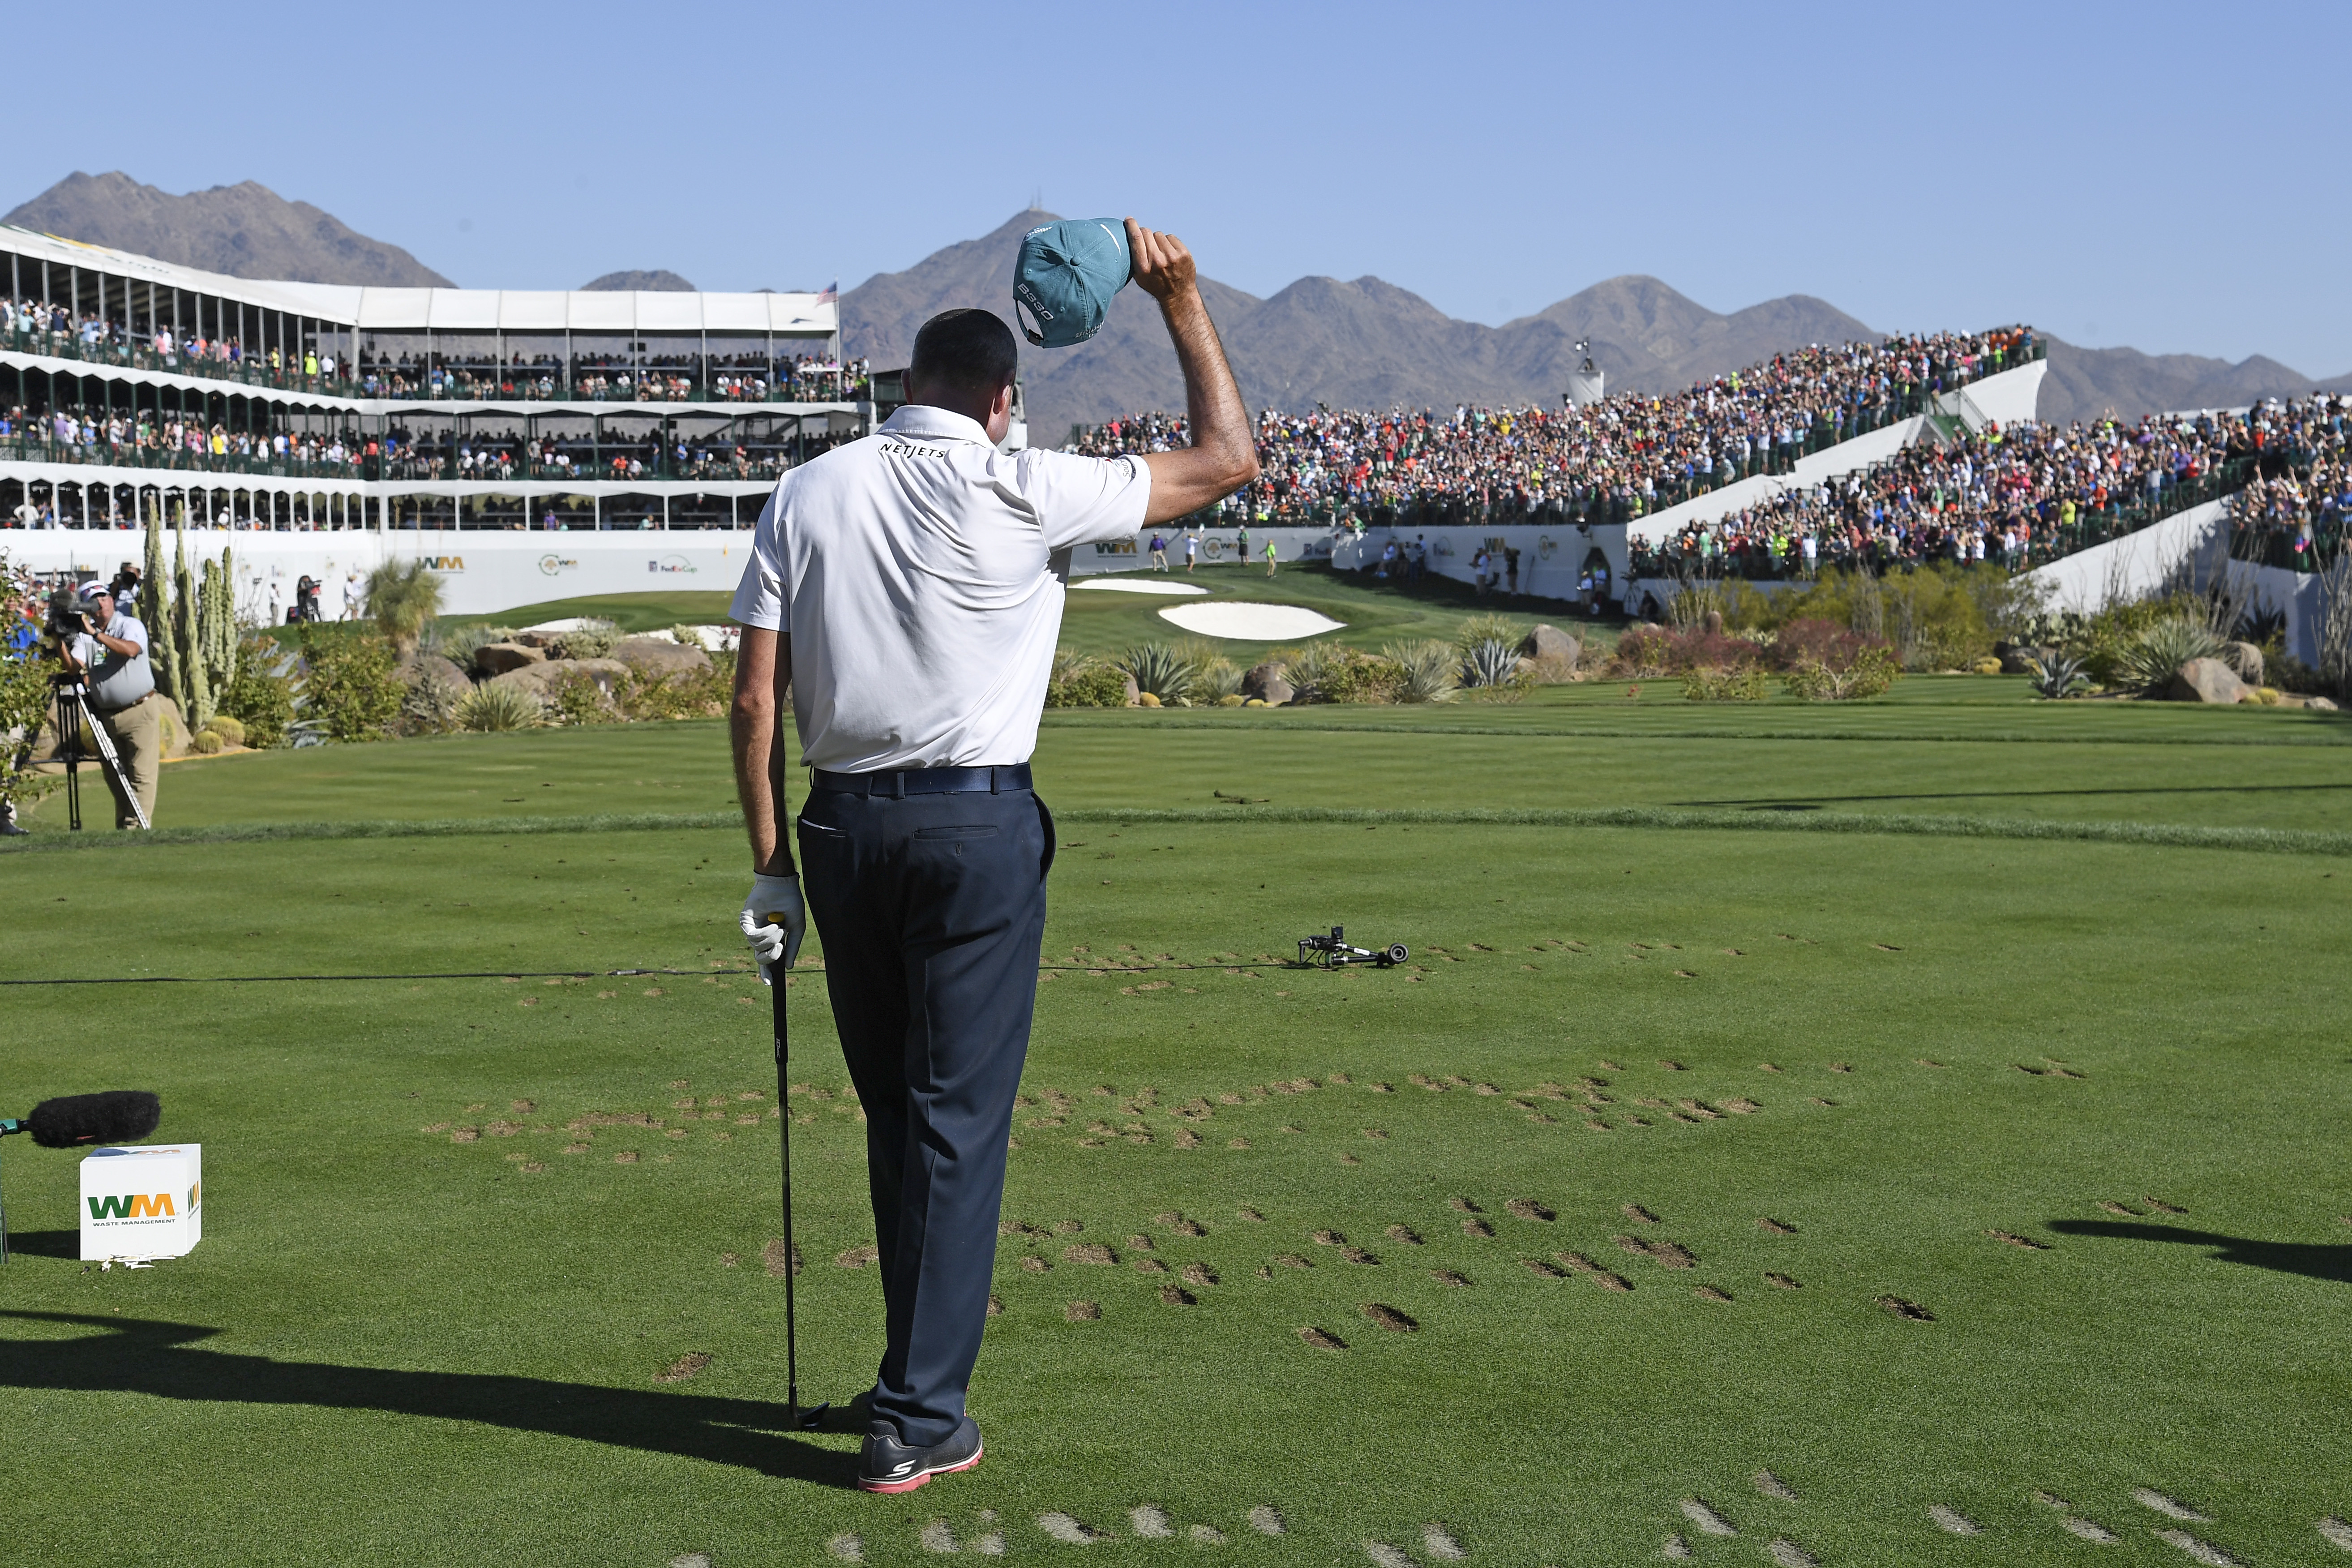 Matt Kuchar almost makes a hole-in-one on the 16th hole during the final round of the Waste Management Phoenix Open, at TPC Scottsdale on February 4, 2018 in Scottsdale, Arizona.